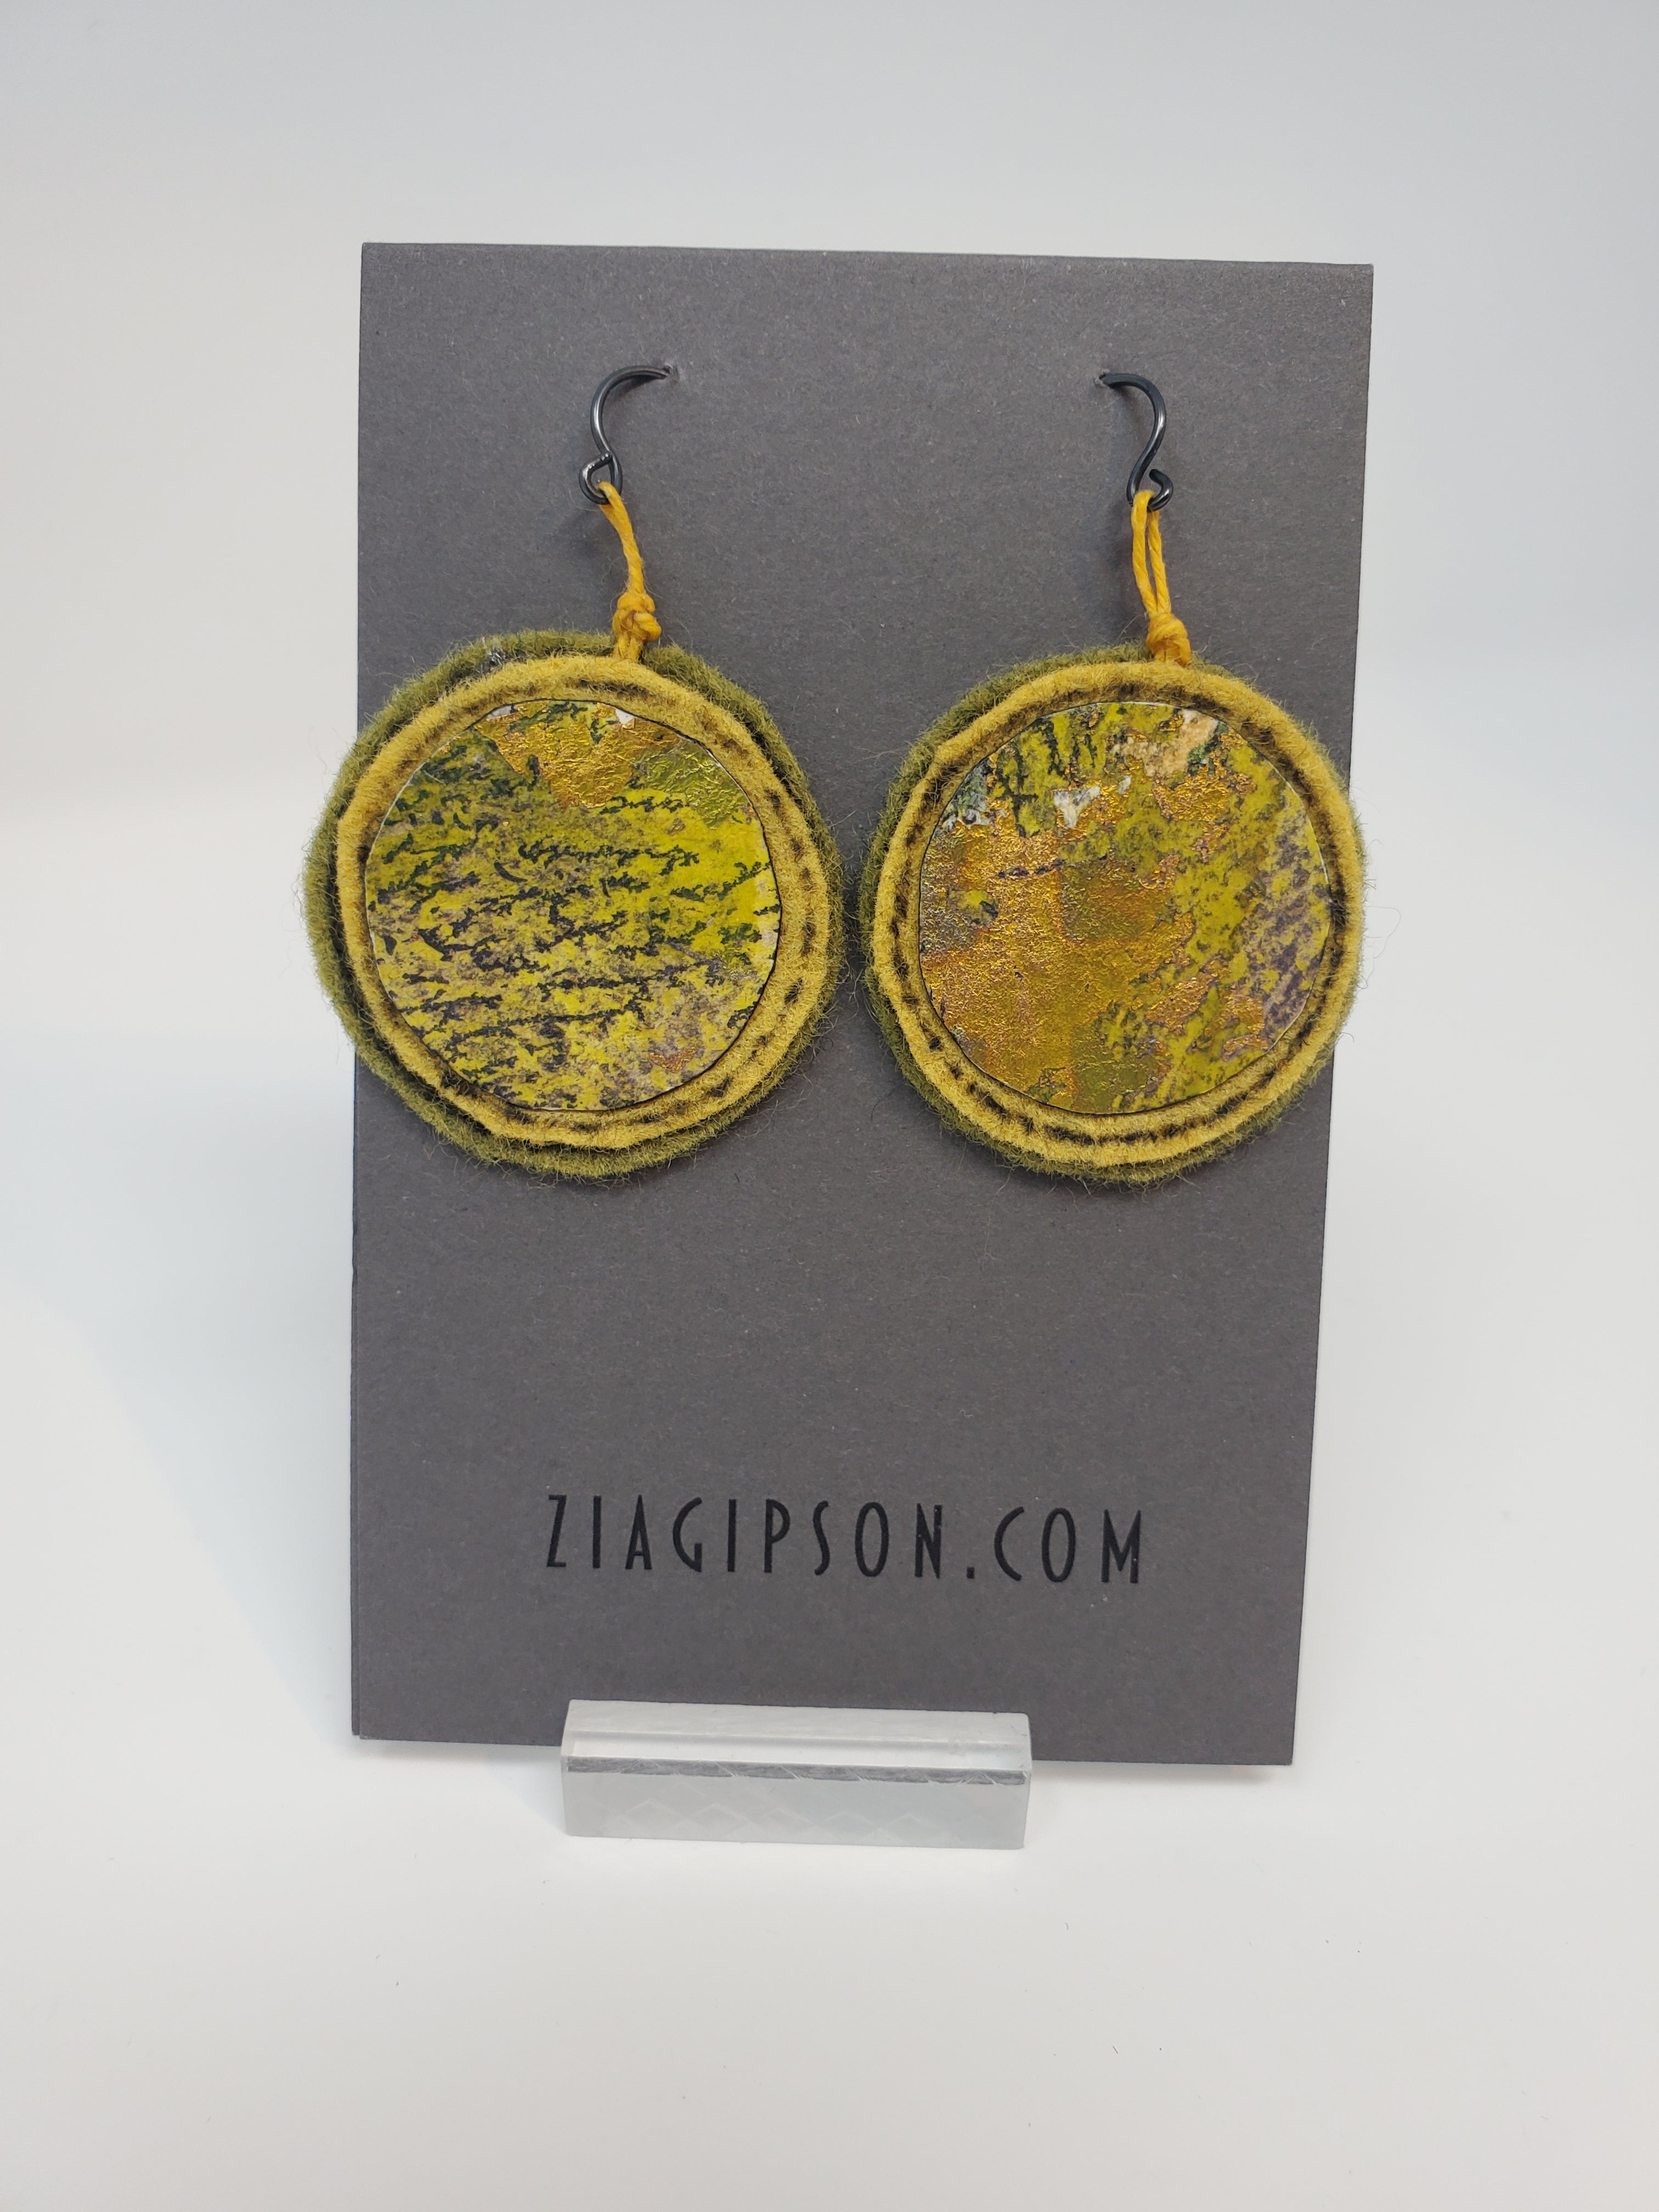 Yellow and Gold Round Felted Earrings by Zia Gipson